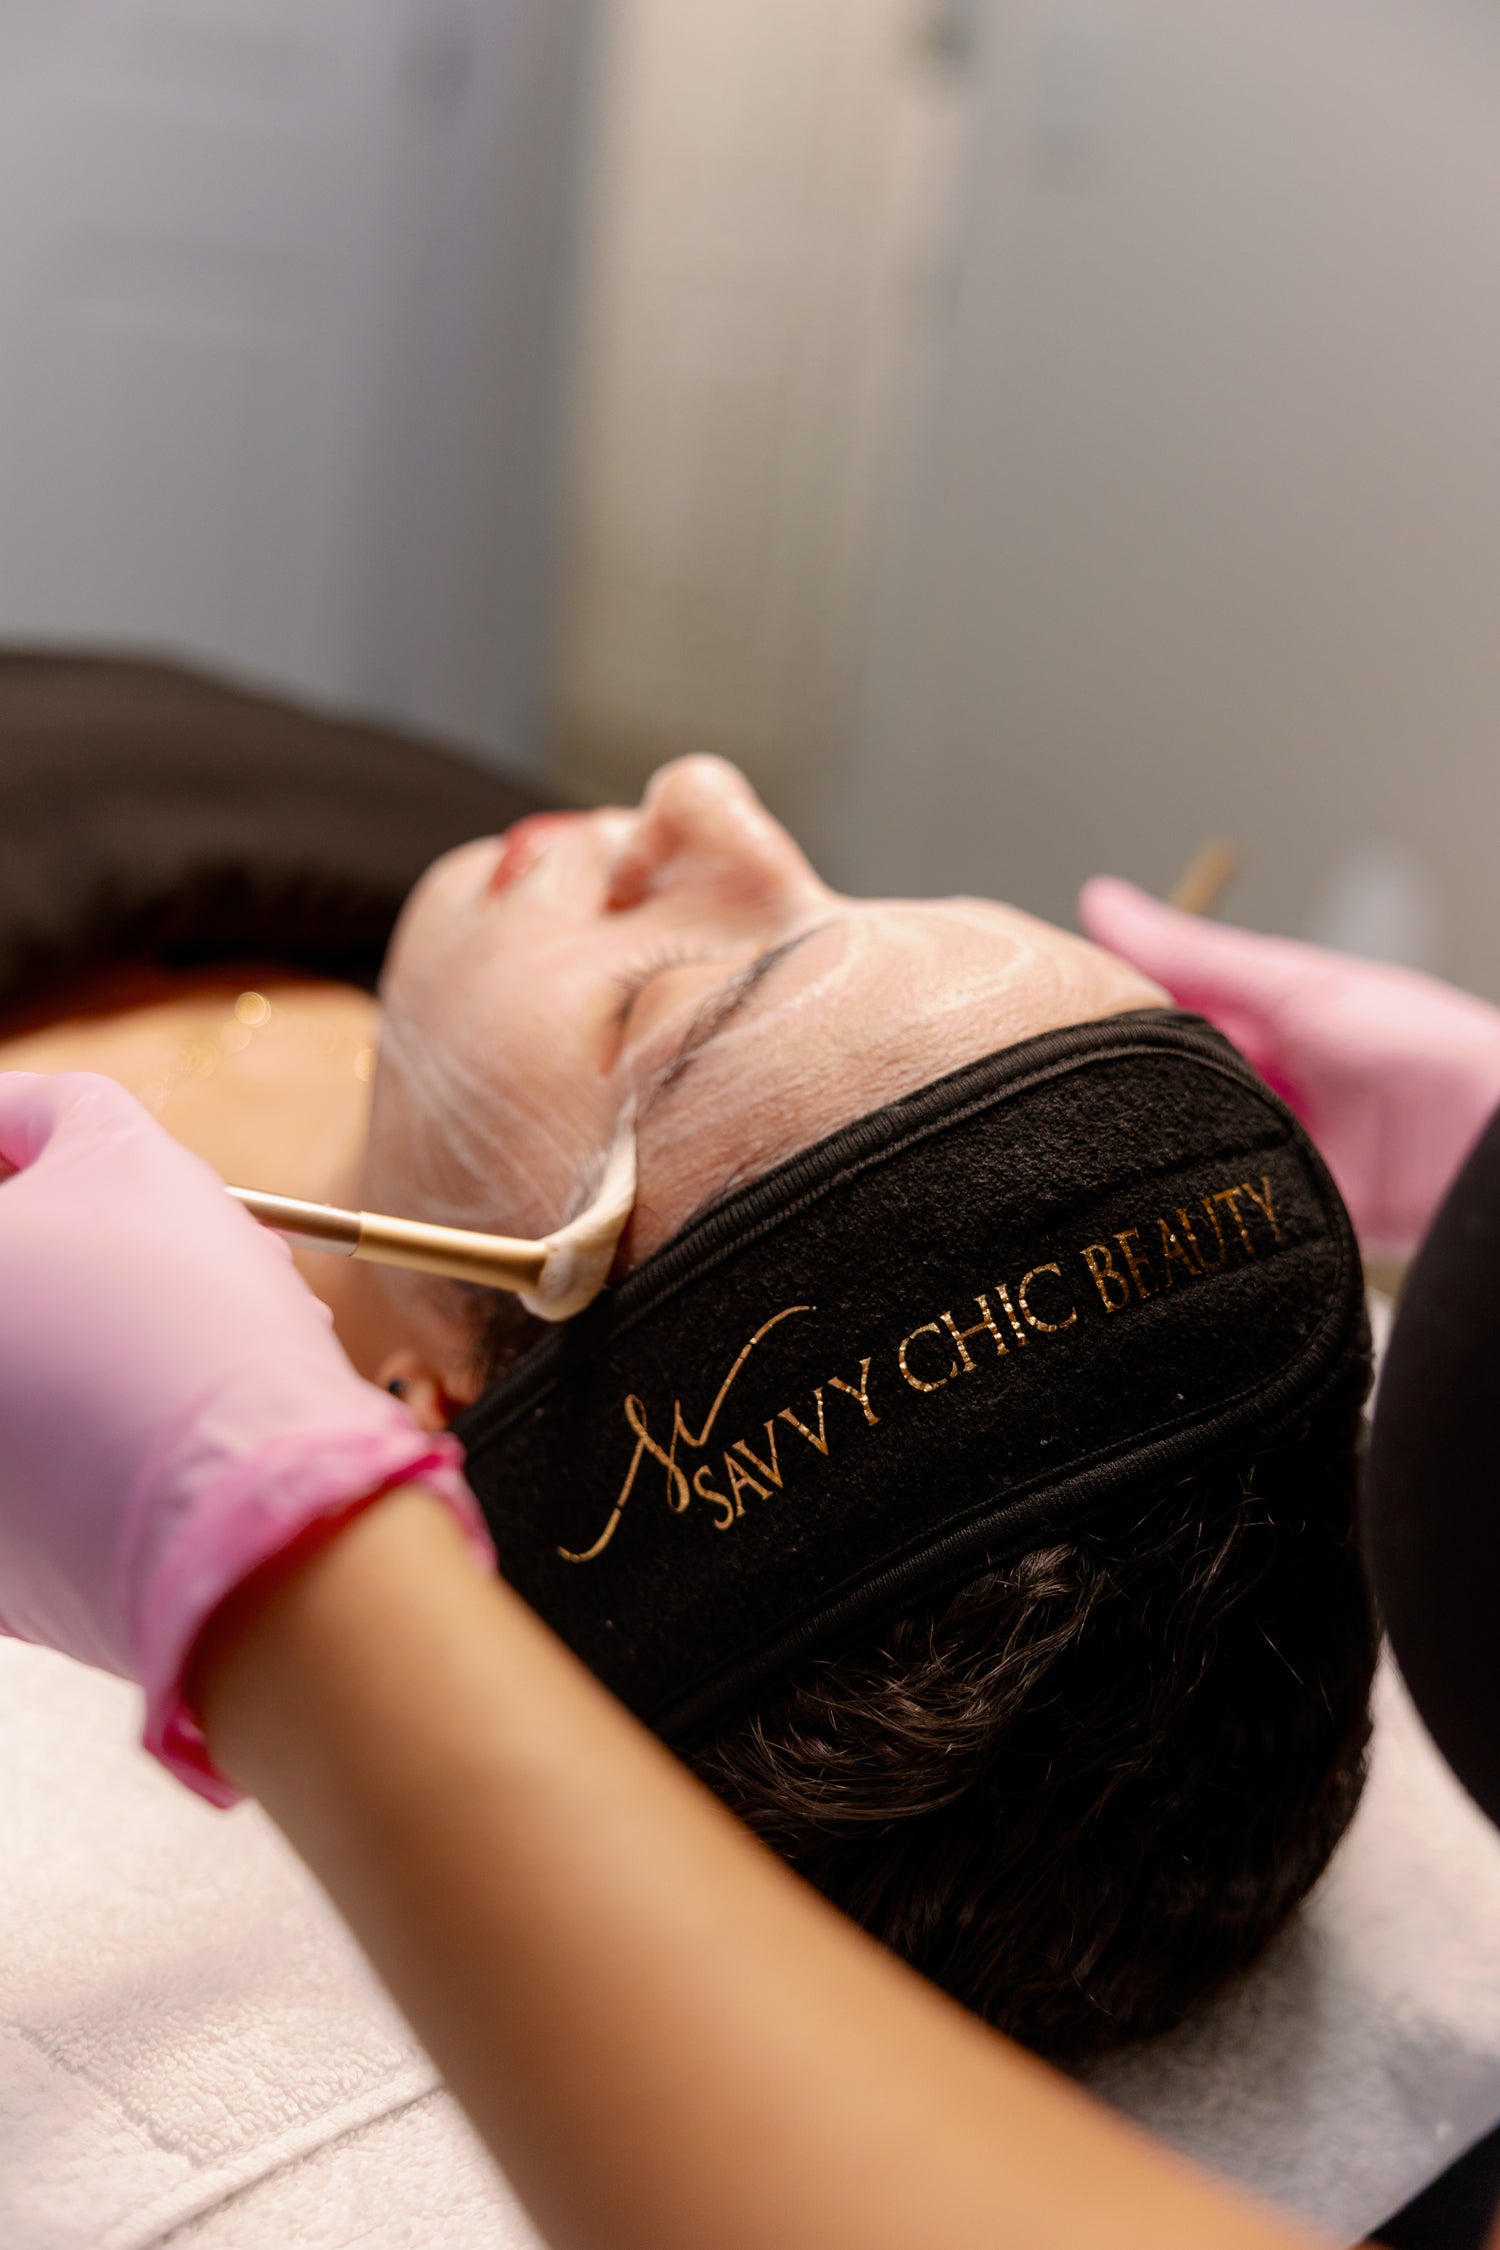 GLOW UP WITH OUR LUXURIOUS FACIALS!